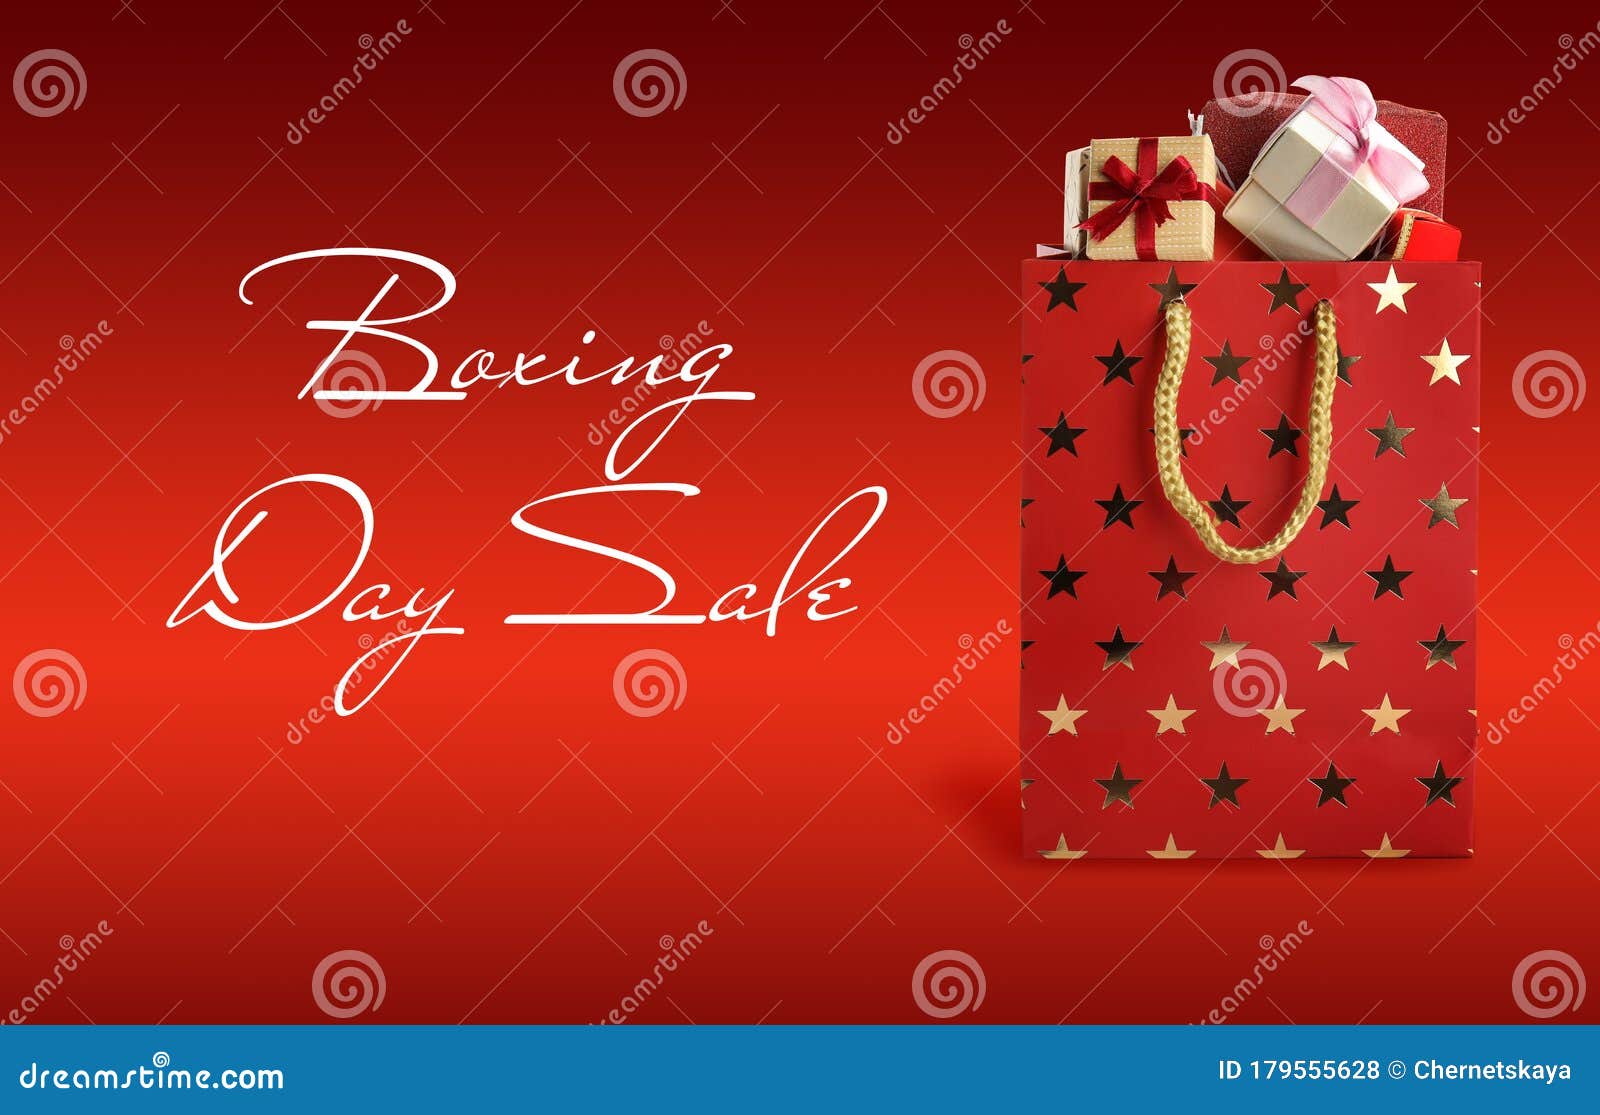 travel bags boxing day sale